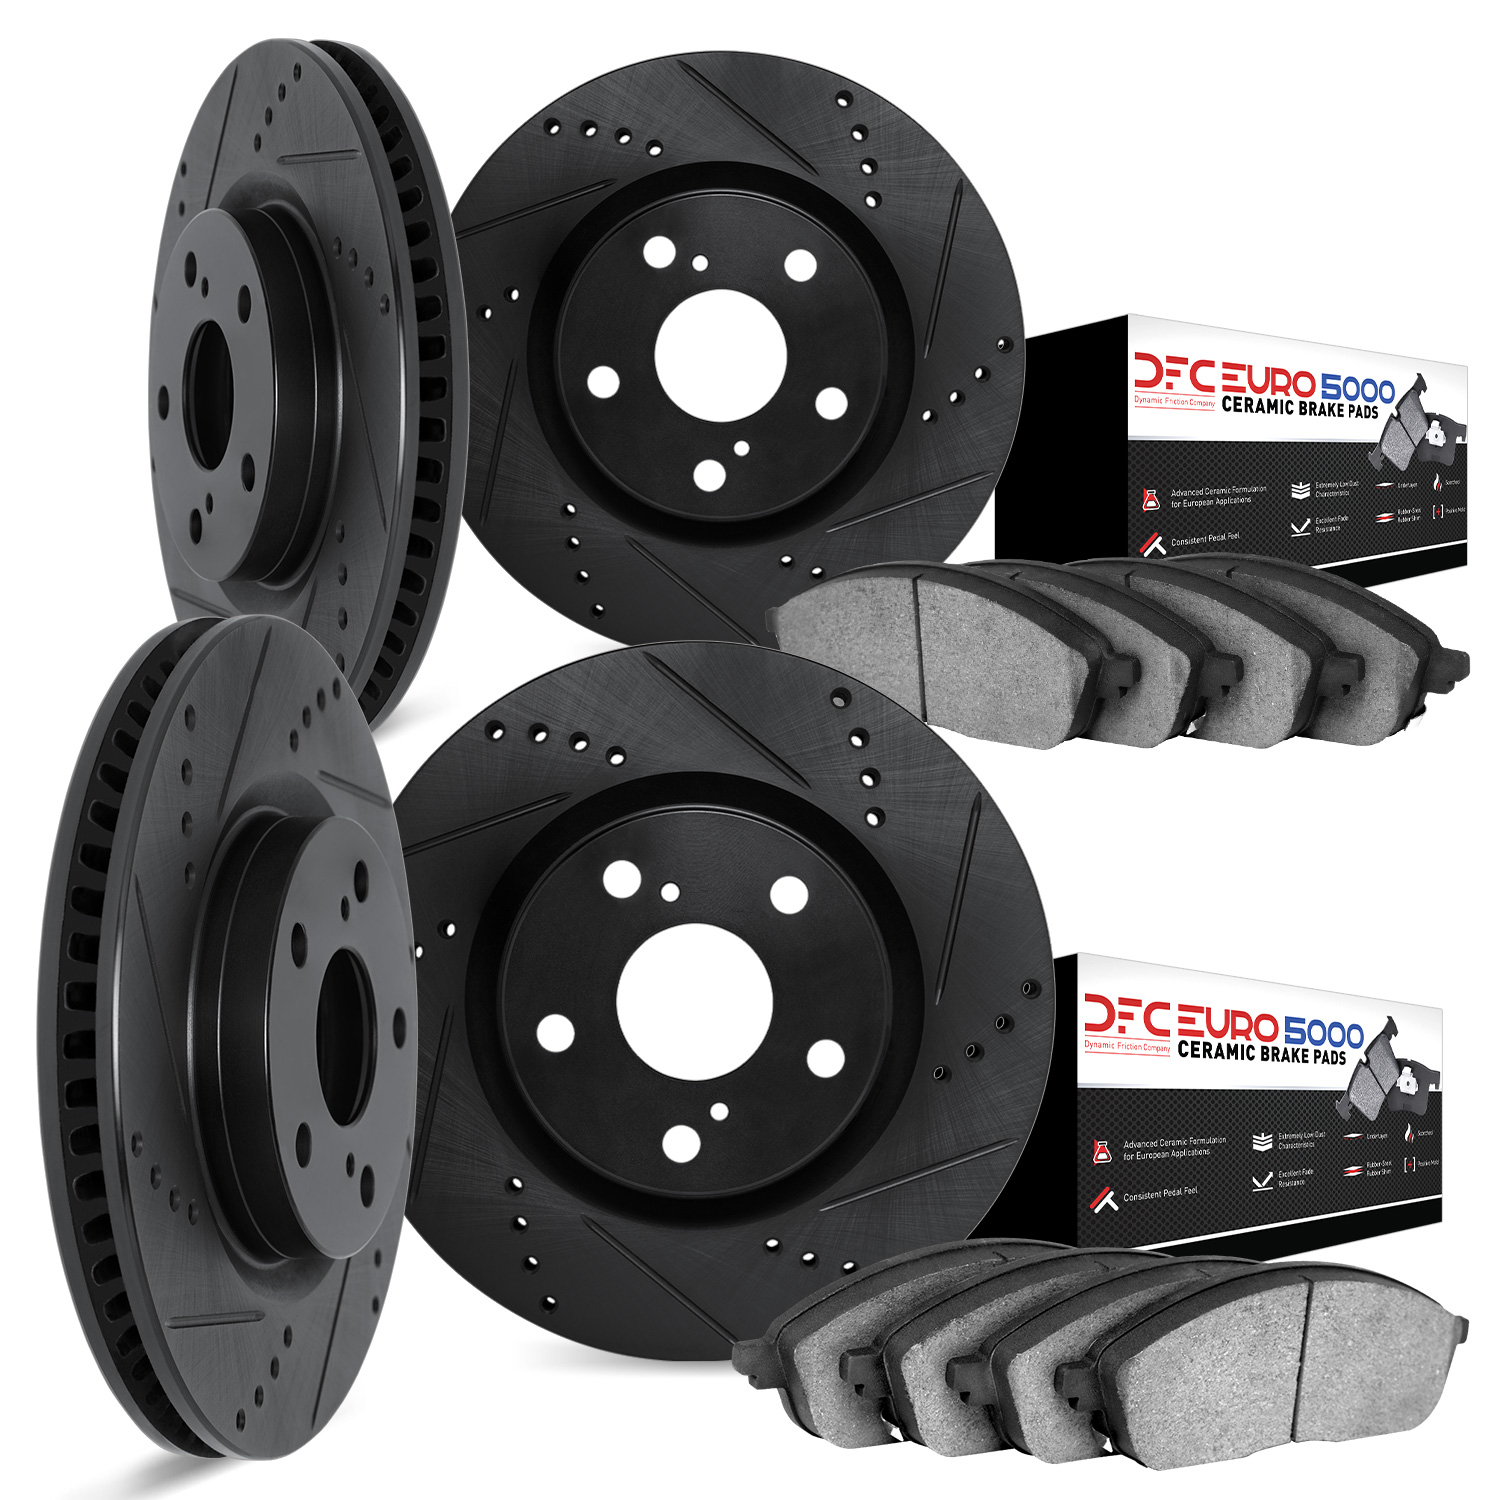 8604-31034 Drilled/Slotted Brake Rotors w/5000 Euro Ceramic Brake Pads Kit [Black], 2007-2018 BMW, Position: Front and Rear